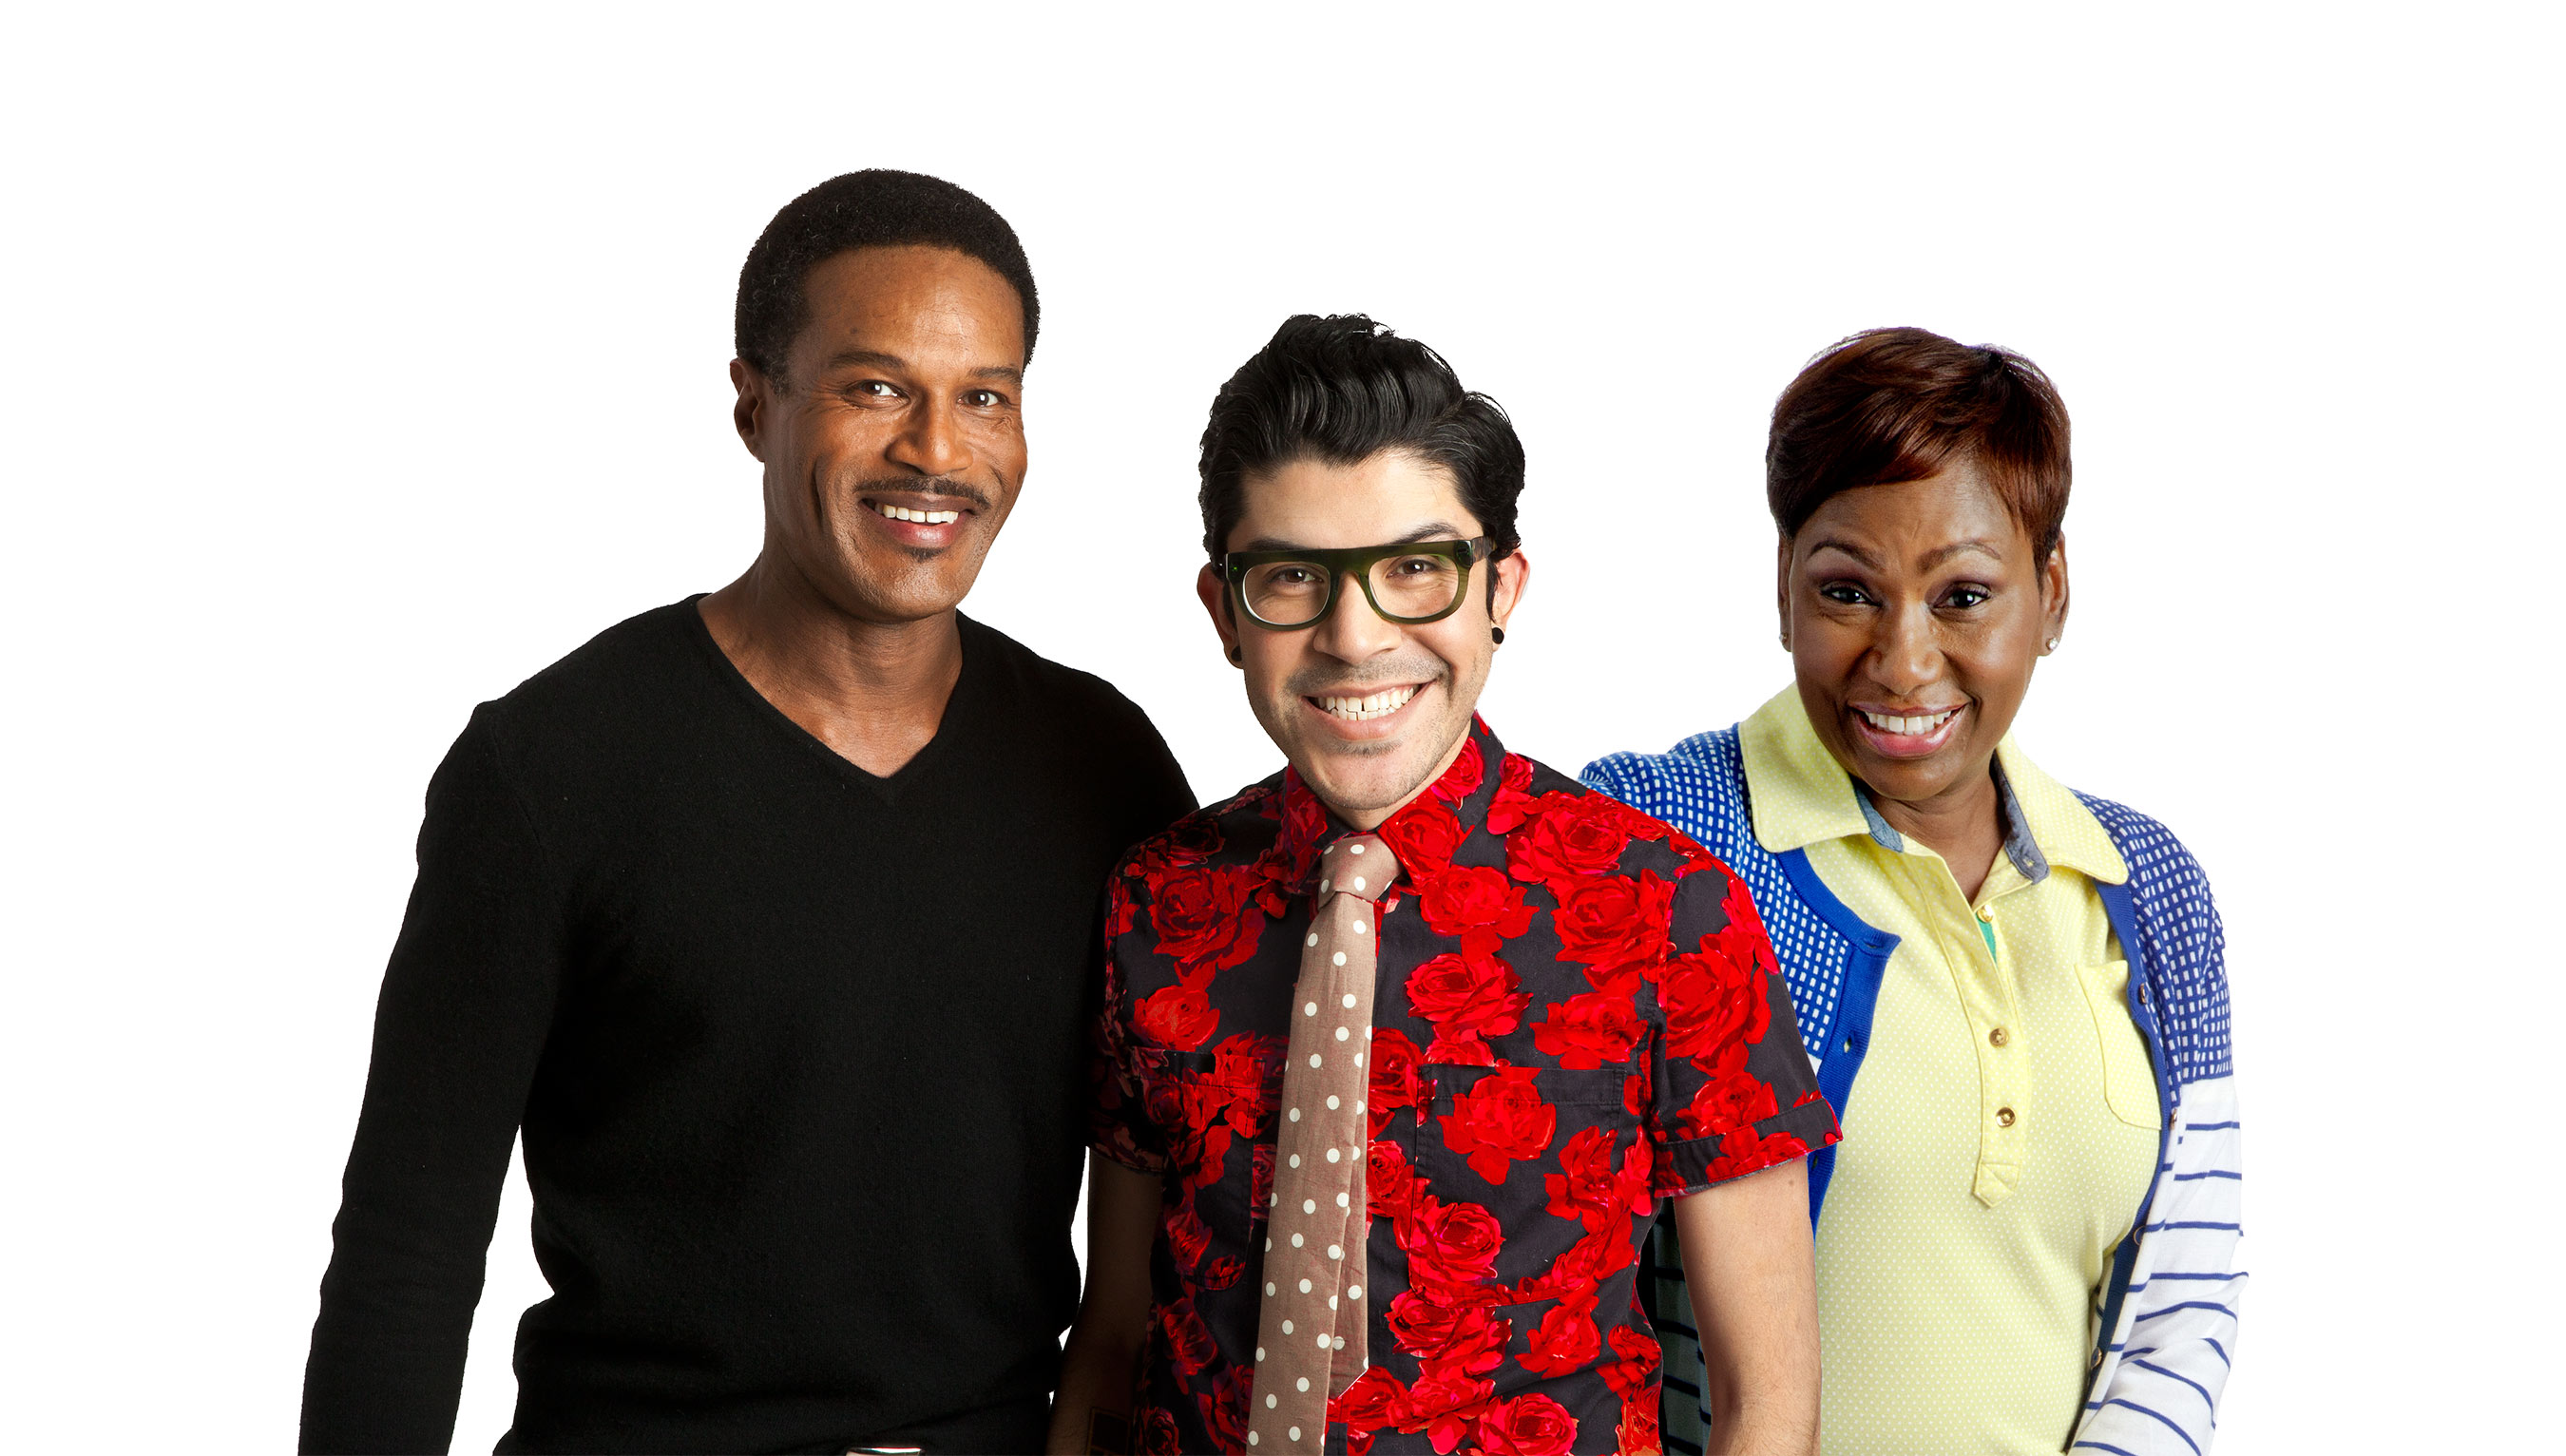 The I Design team wants you to get vocal on World AIDS Day. Pictured from left to right is photographer Duane Cramer, fashion designer Mondo Guerra and music industry insider Maria Davis.